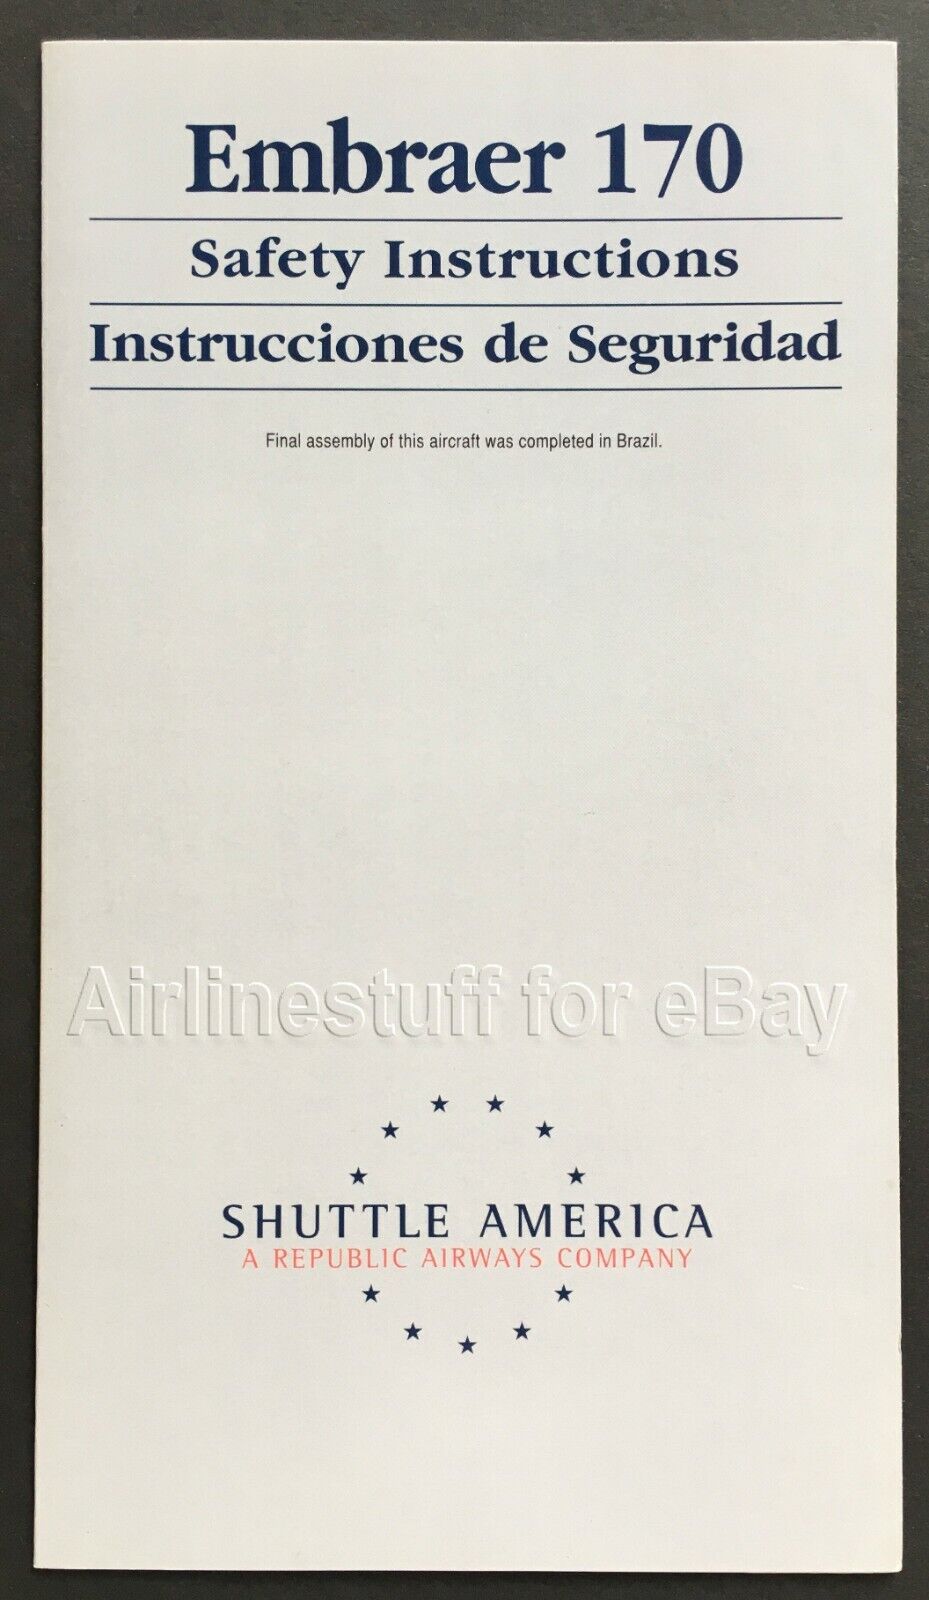 2005 SHUTTLE AMERICA Embraer 170 SAFETY CARD Republic airlines airways jetliner